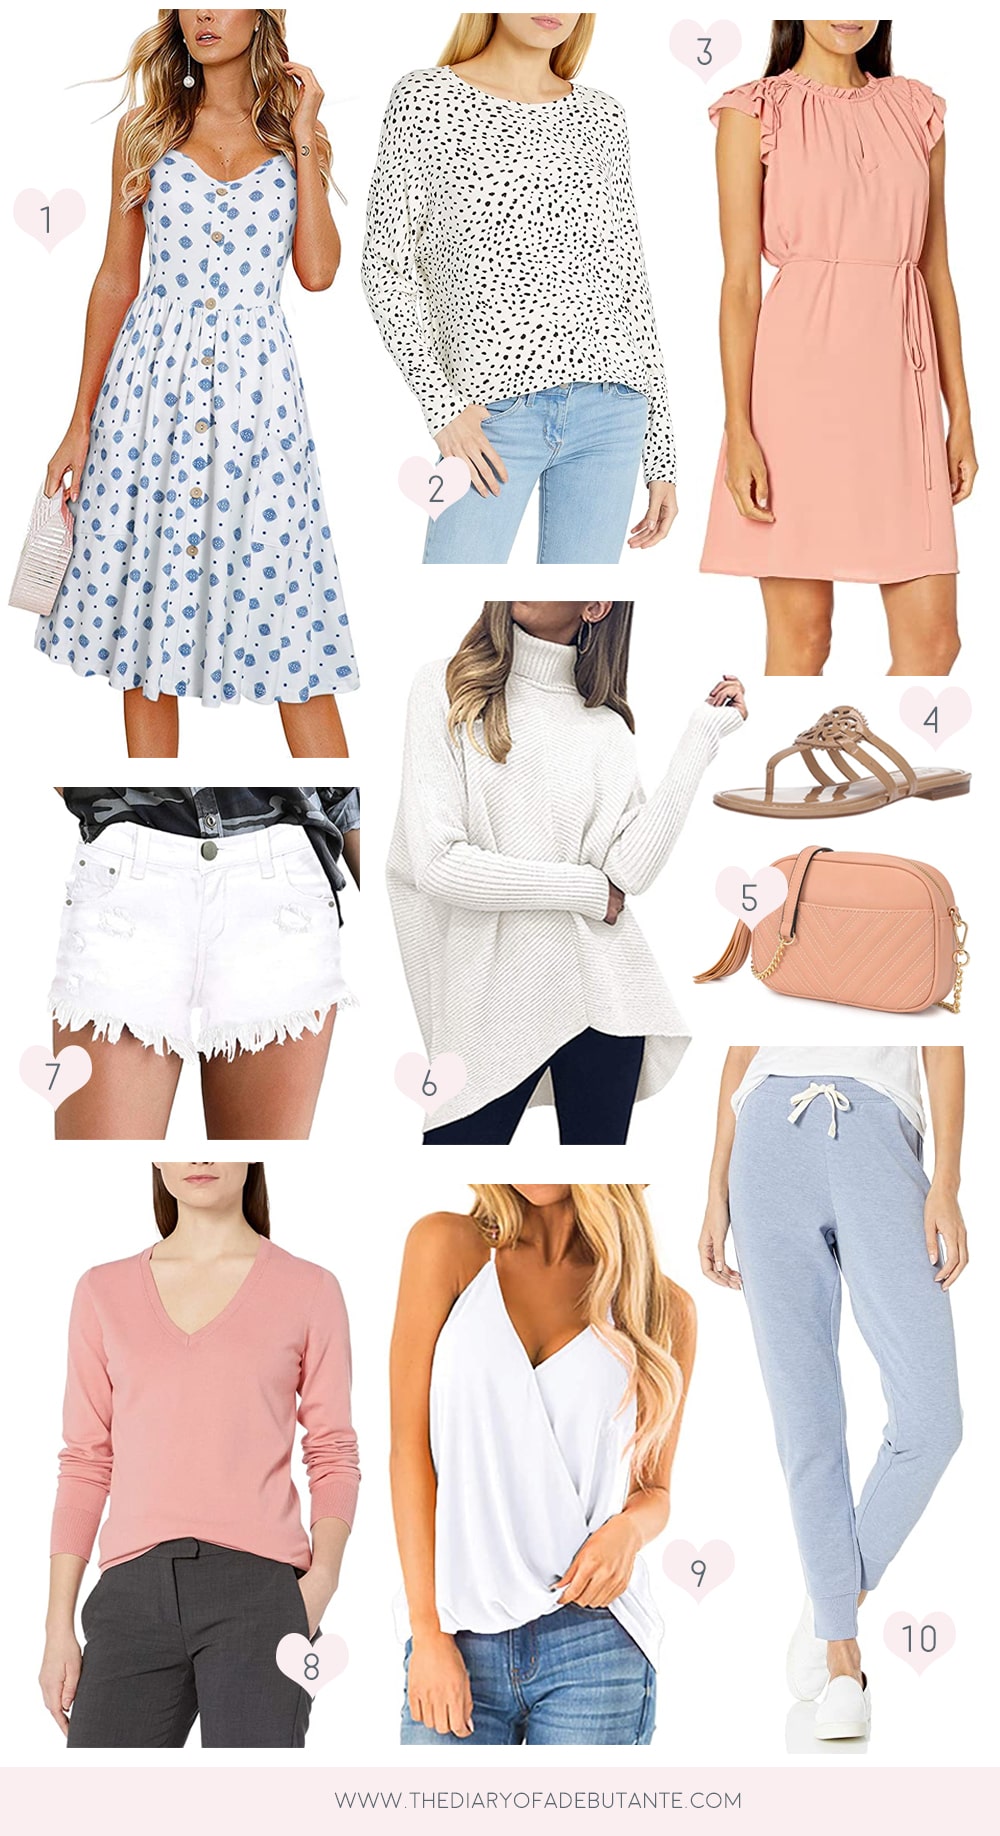 Best Amazon Fashion finds under 50 rounded up by affordable fashion blogger Stephanie Ziajka on Diary of a Debutante